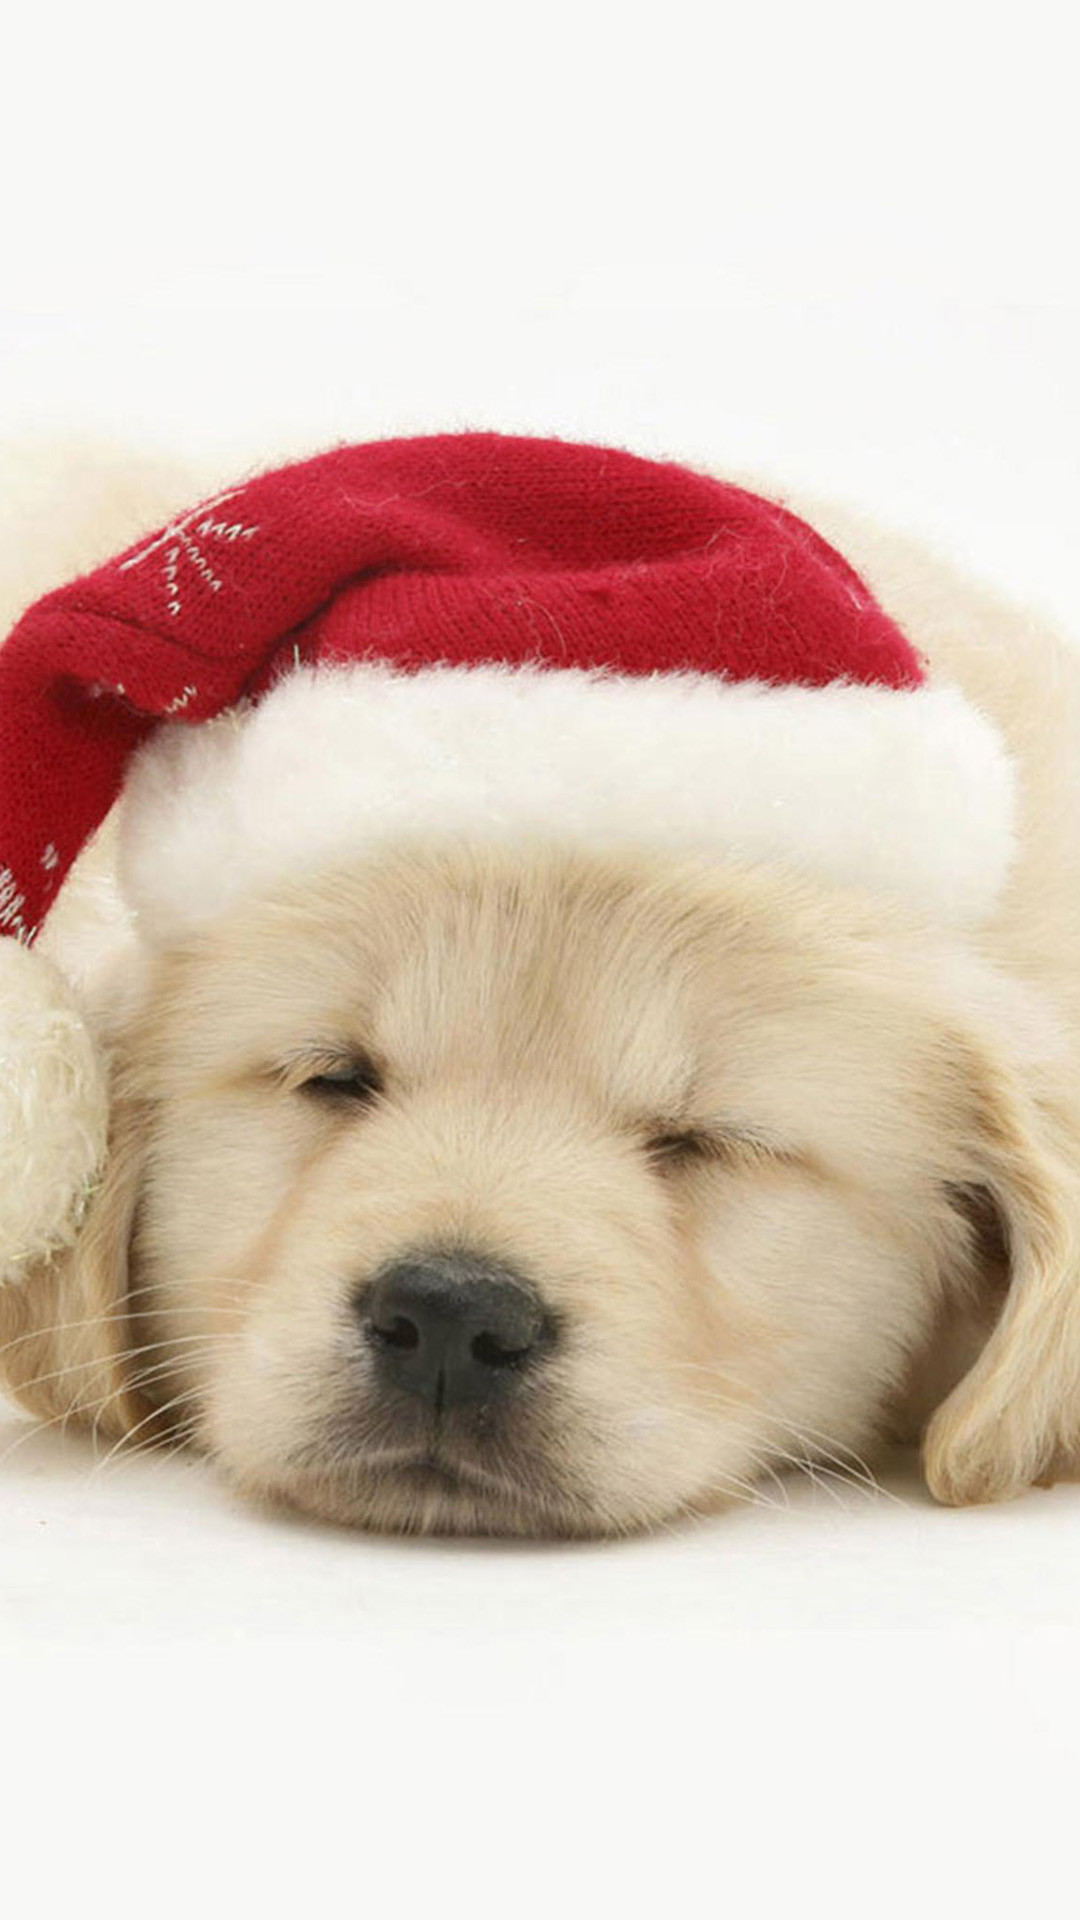 1080x1920 Cute Puppy In Christmas Hat iPhone 6 wallpaper